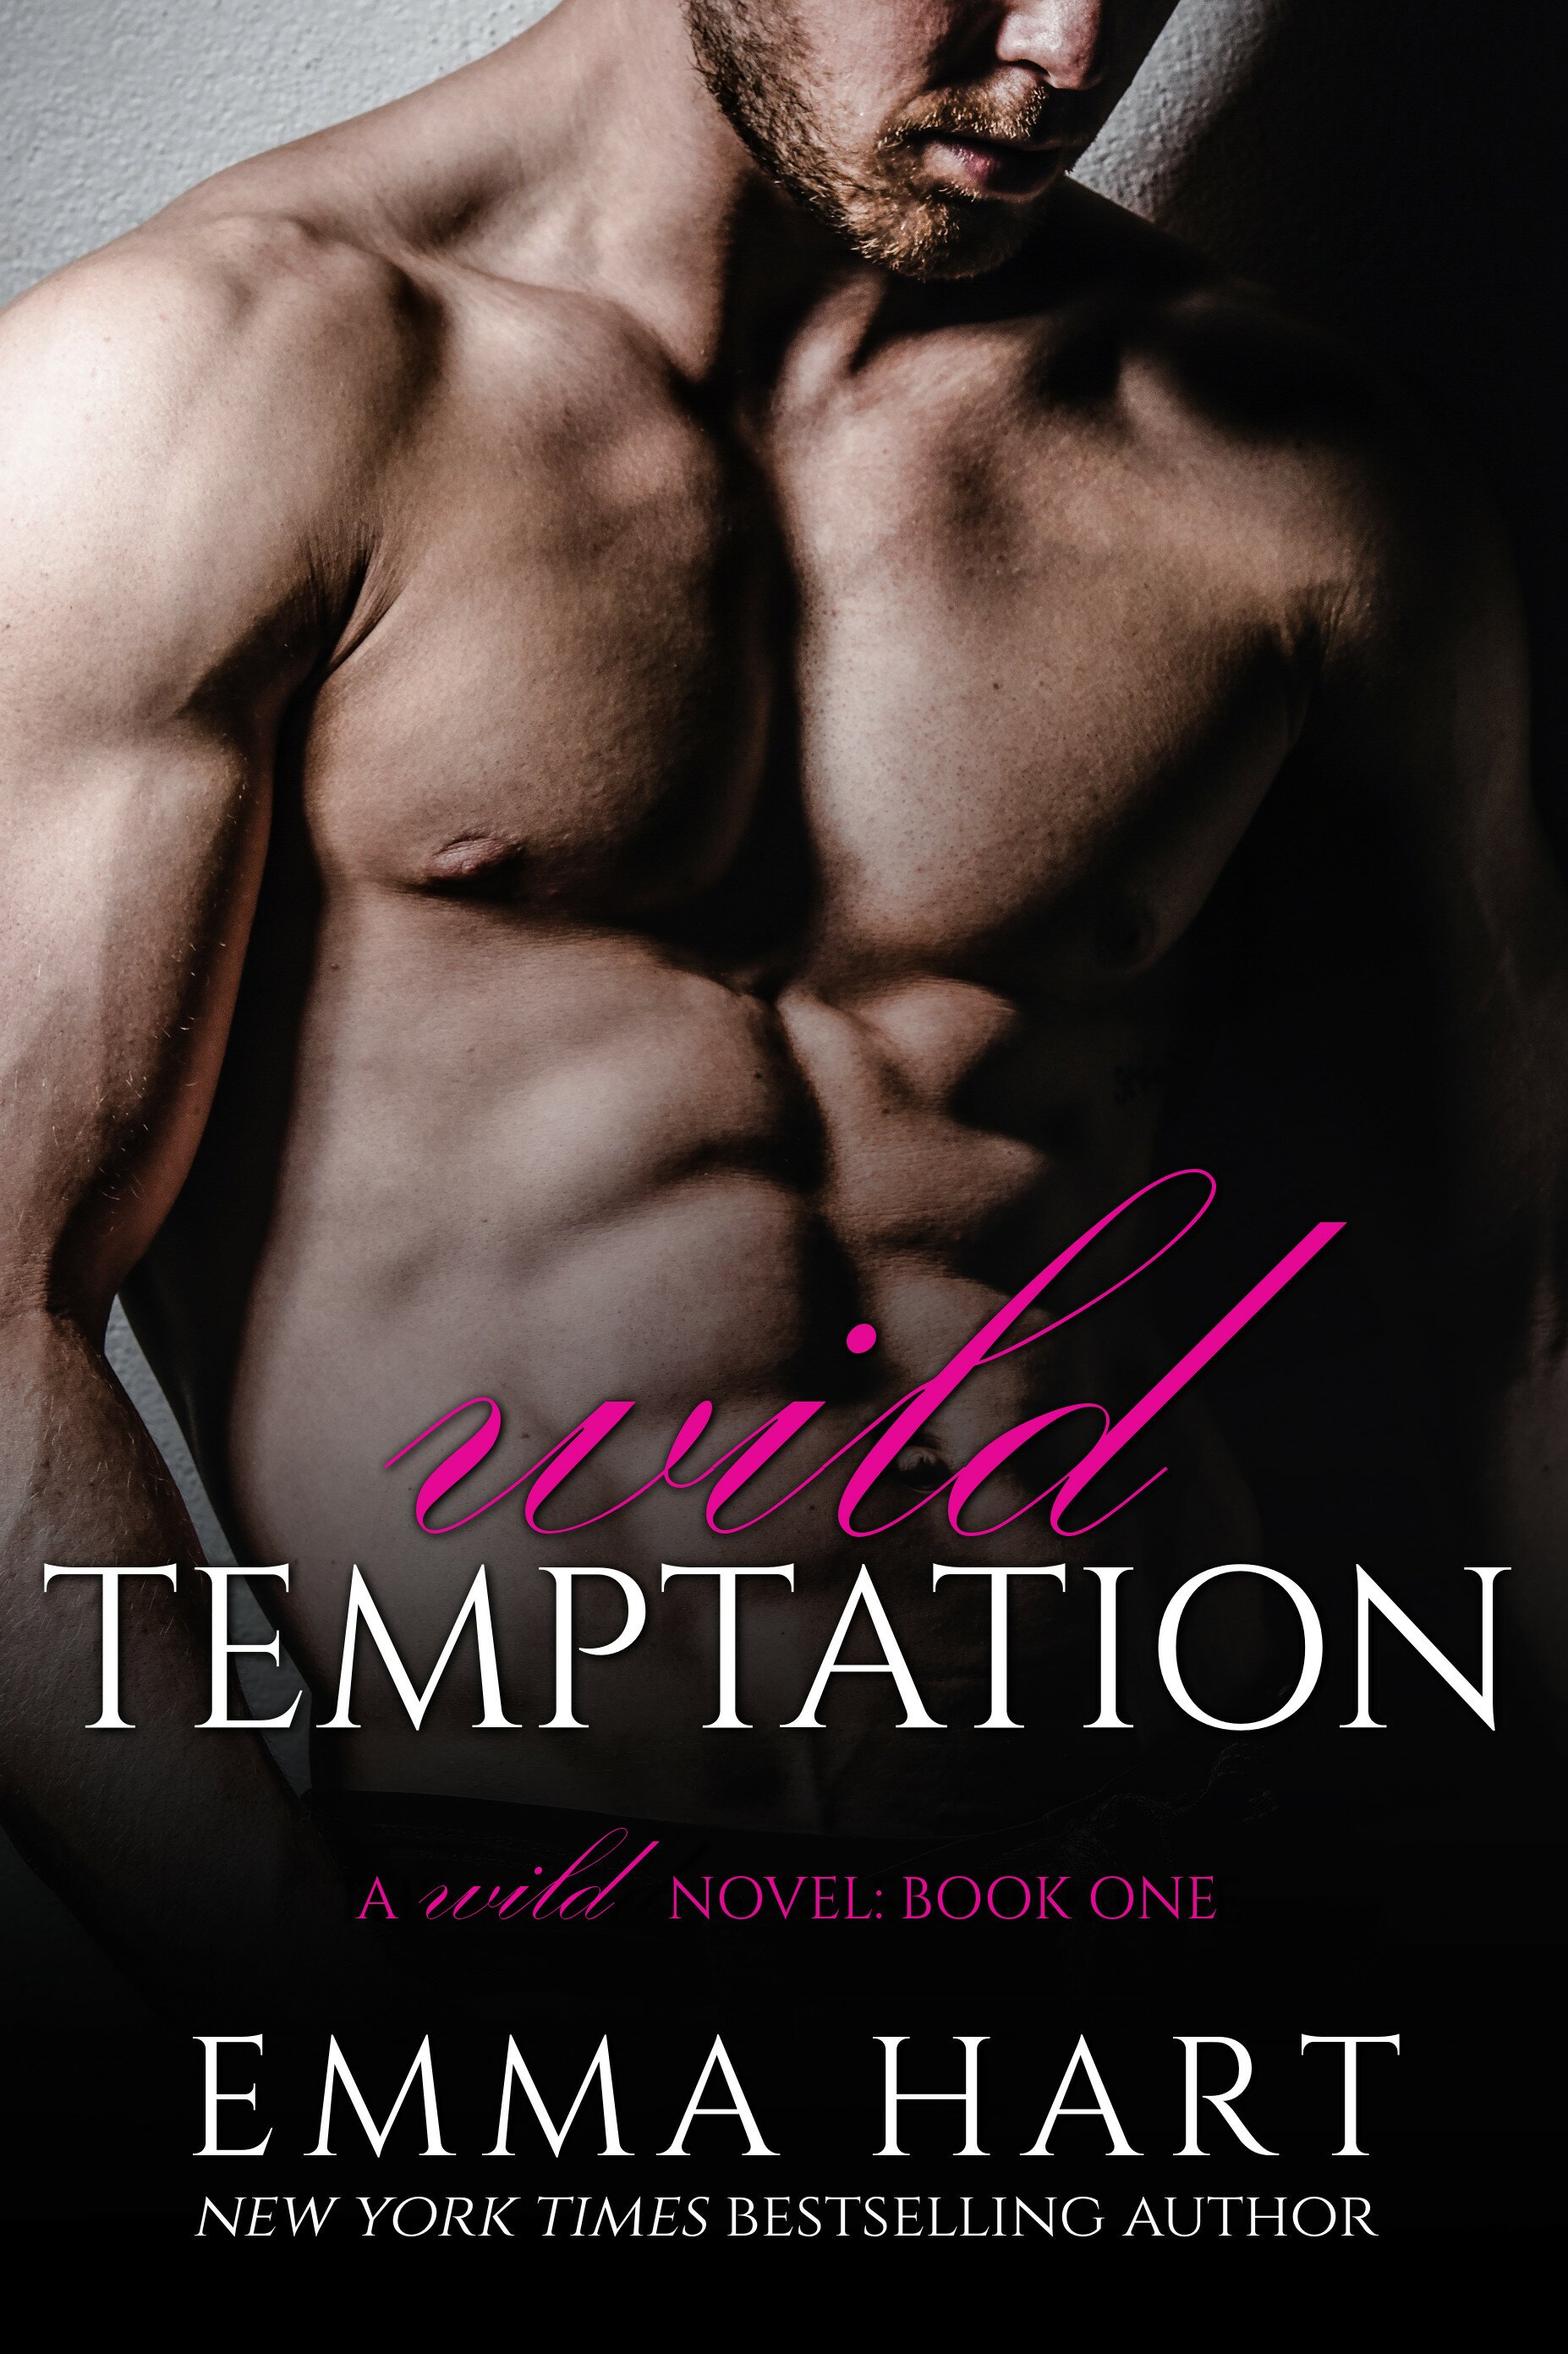 Mr. Tall, Dark, Handsome, and Oh So British! – Wild Temptation by Emma Hart Review!